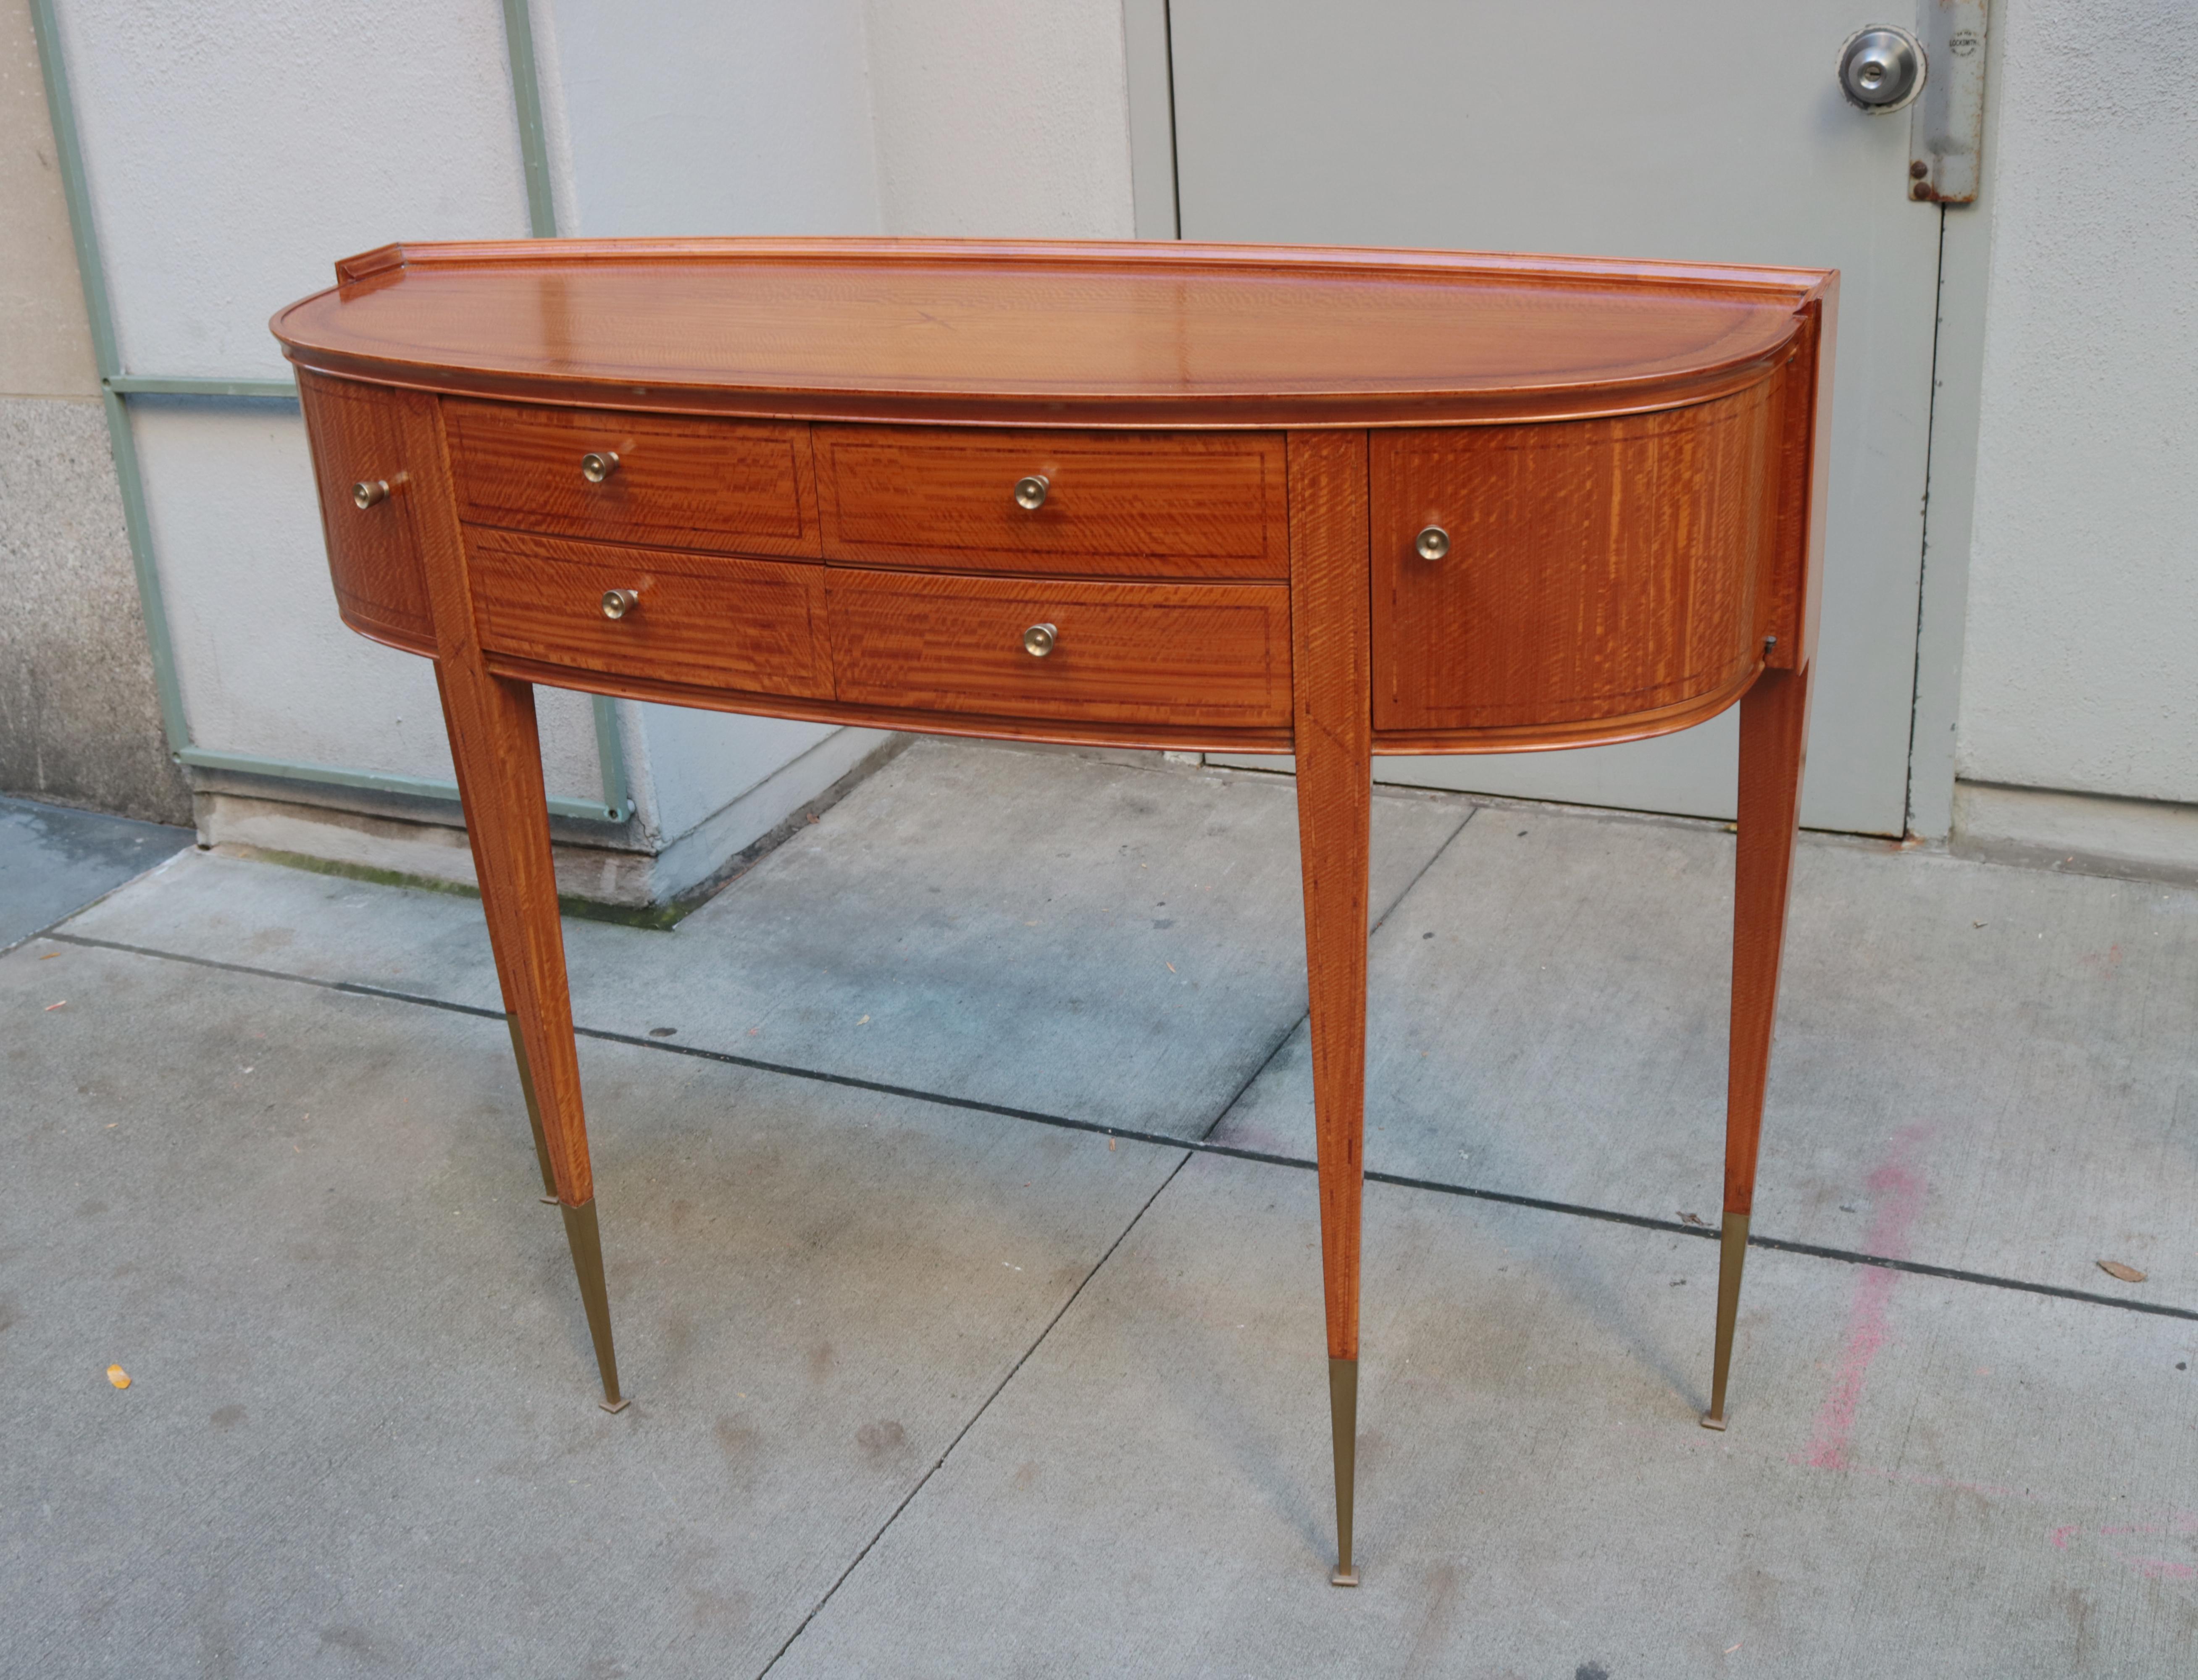 An Italian midcentury wall console.
Four central drawers flanked by curved doors.
Tiger maple with fruitwood inlay details, patinated brass pulls and sabots.